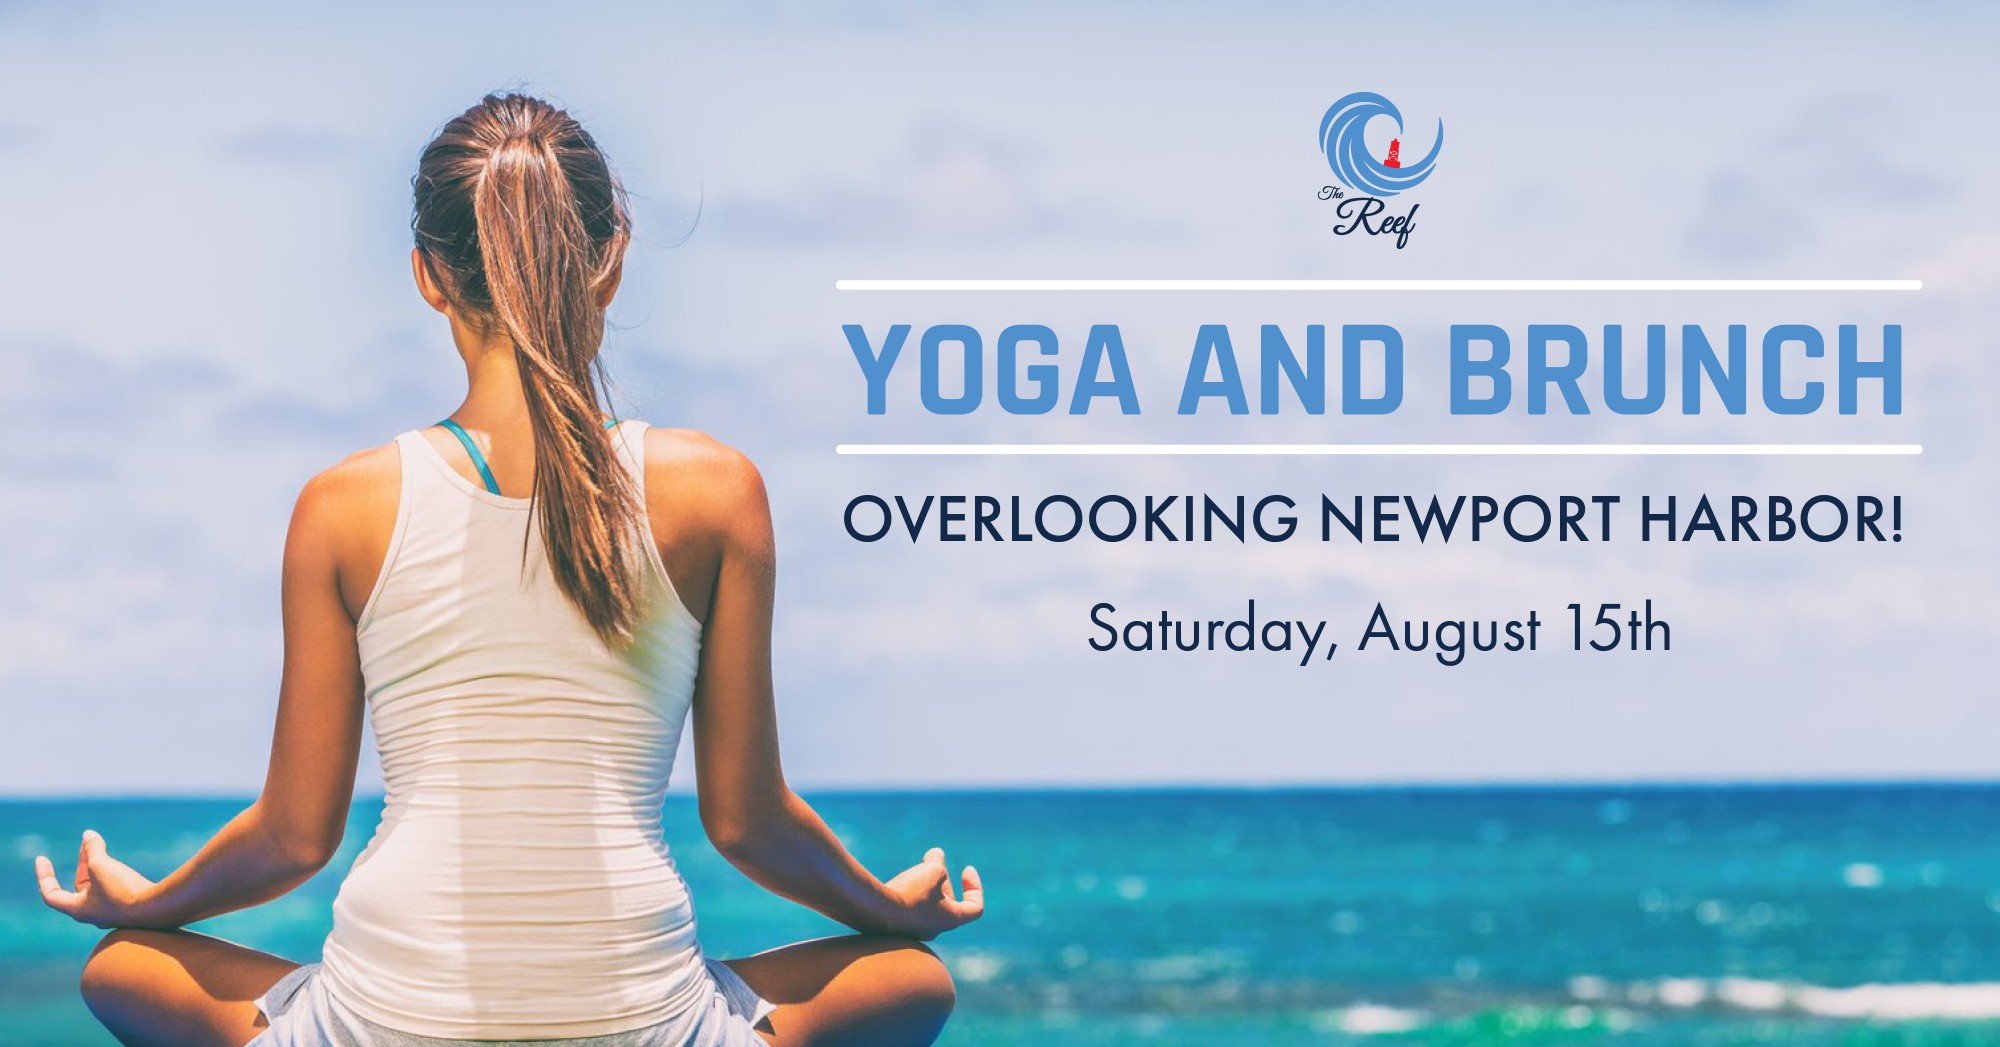 Yoga and Brunch - The Reef